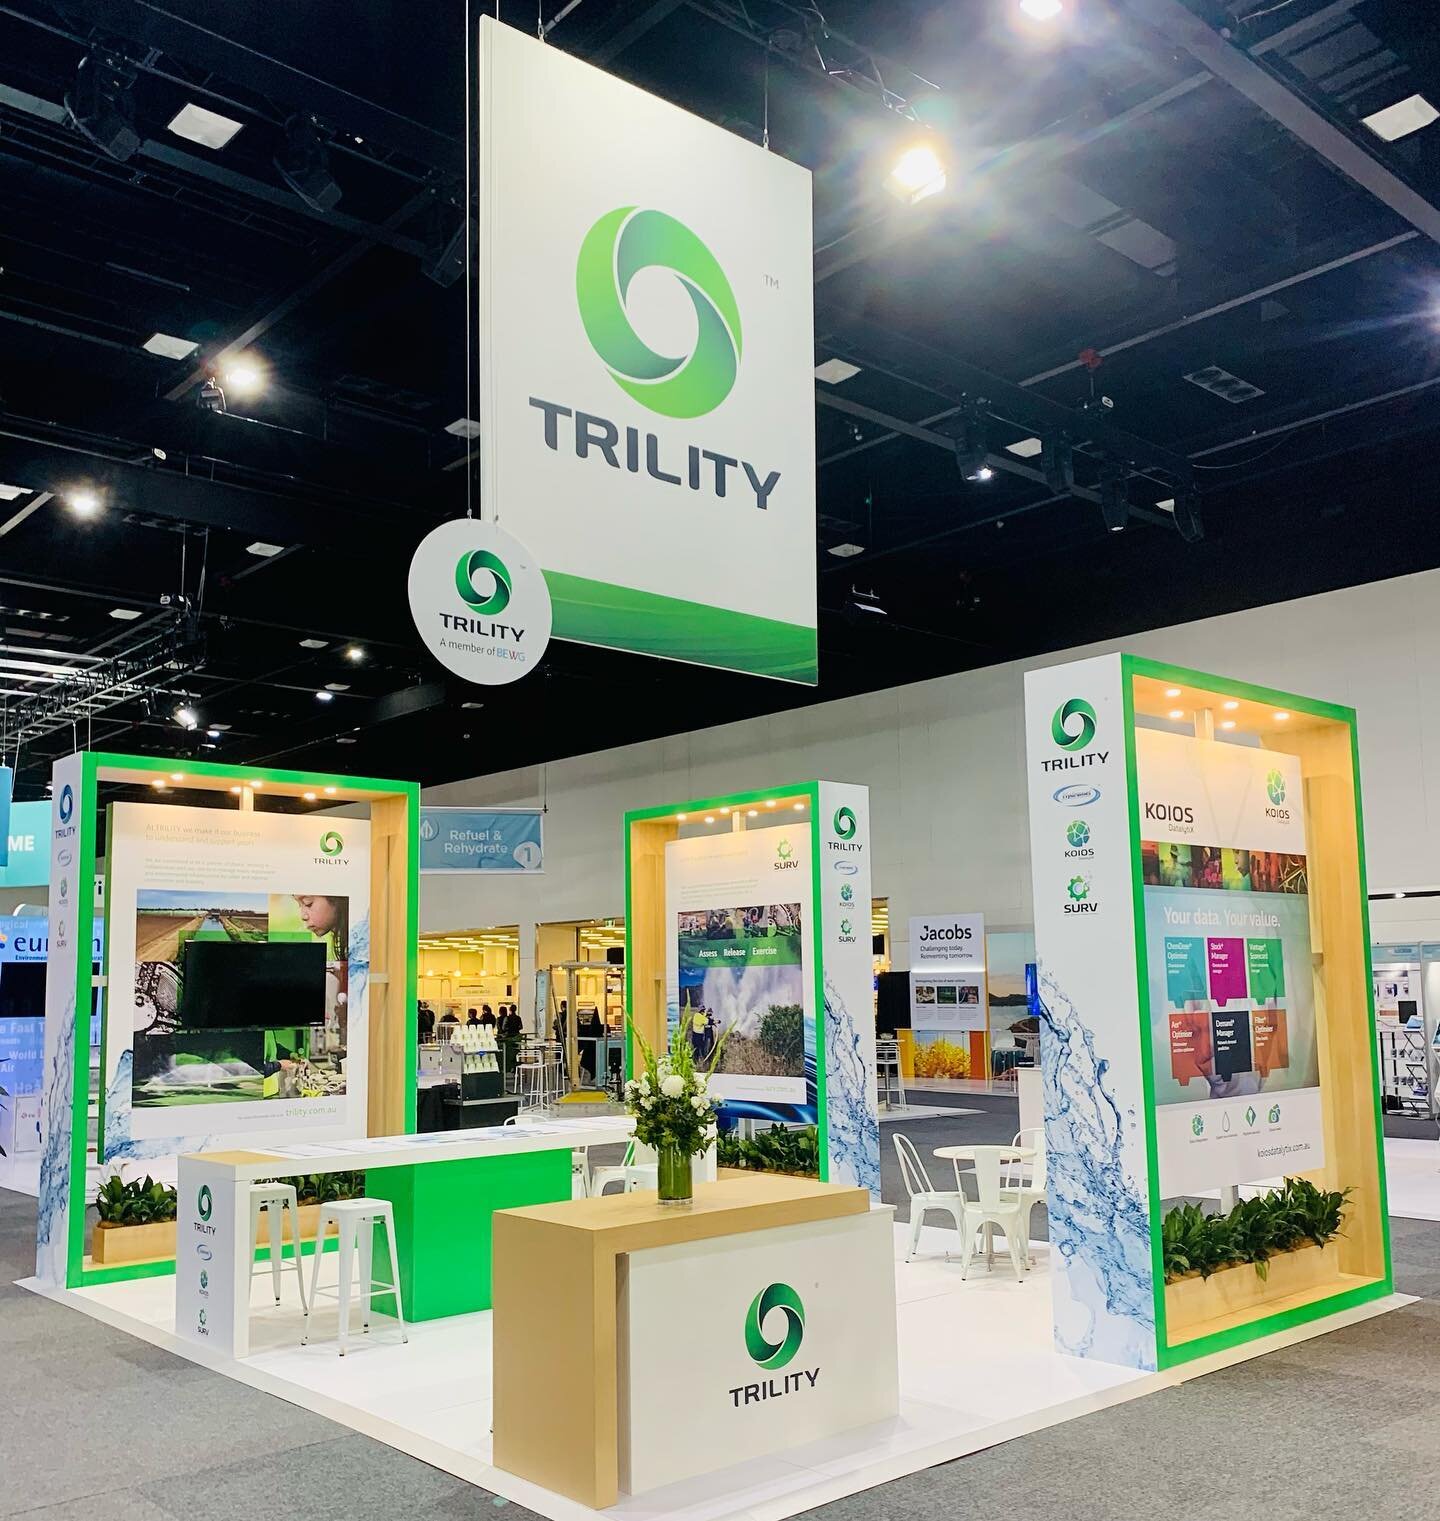 Good to be back on the show floor this week in Adelaide - delivering a striking custom stand for our amazing client #Trility at #ozwater21.